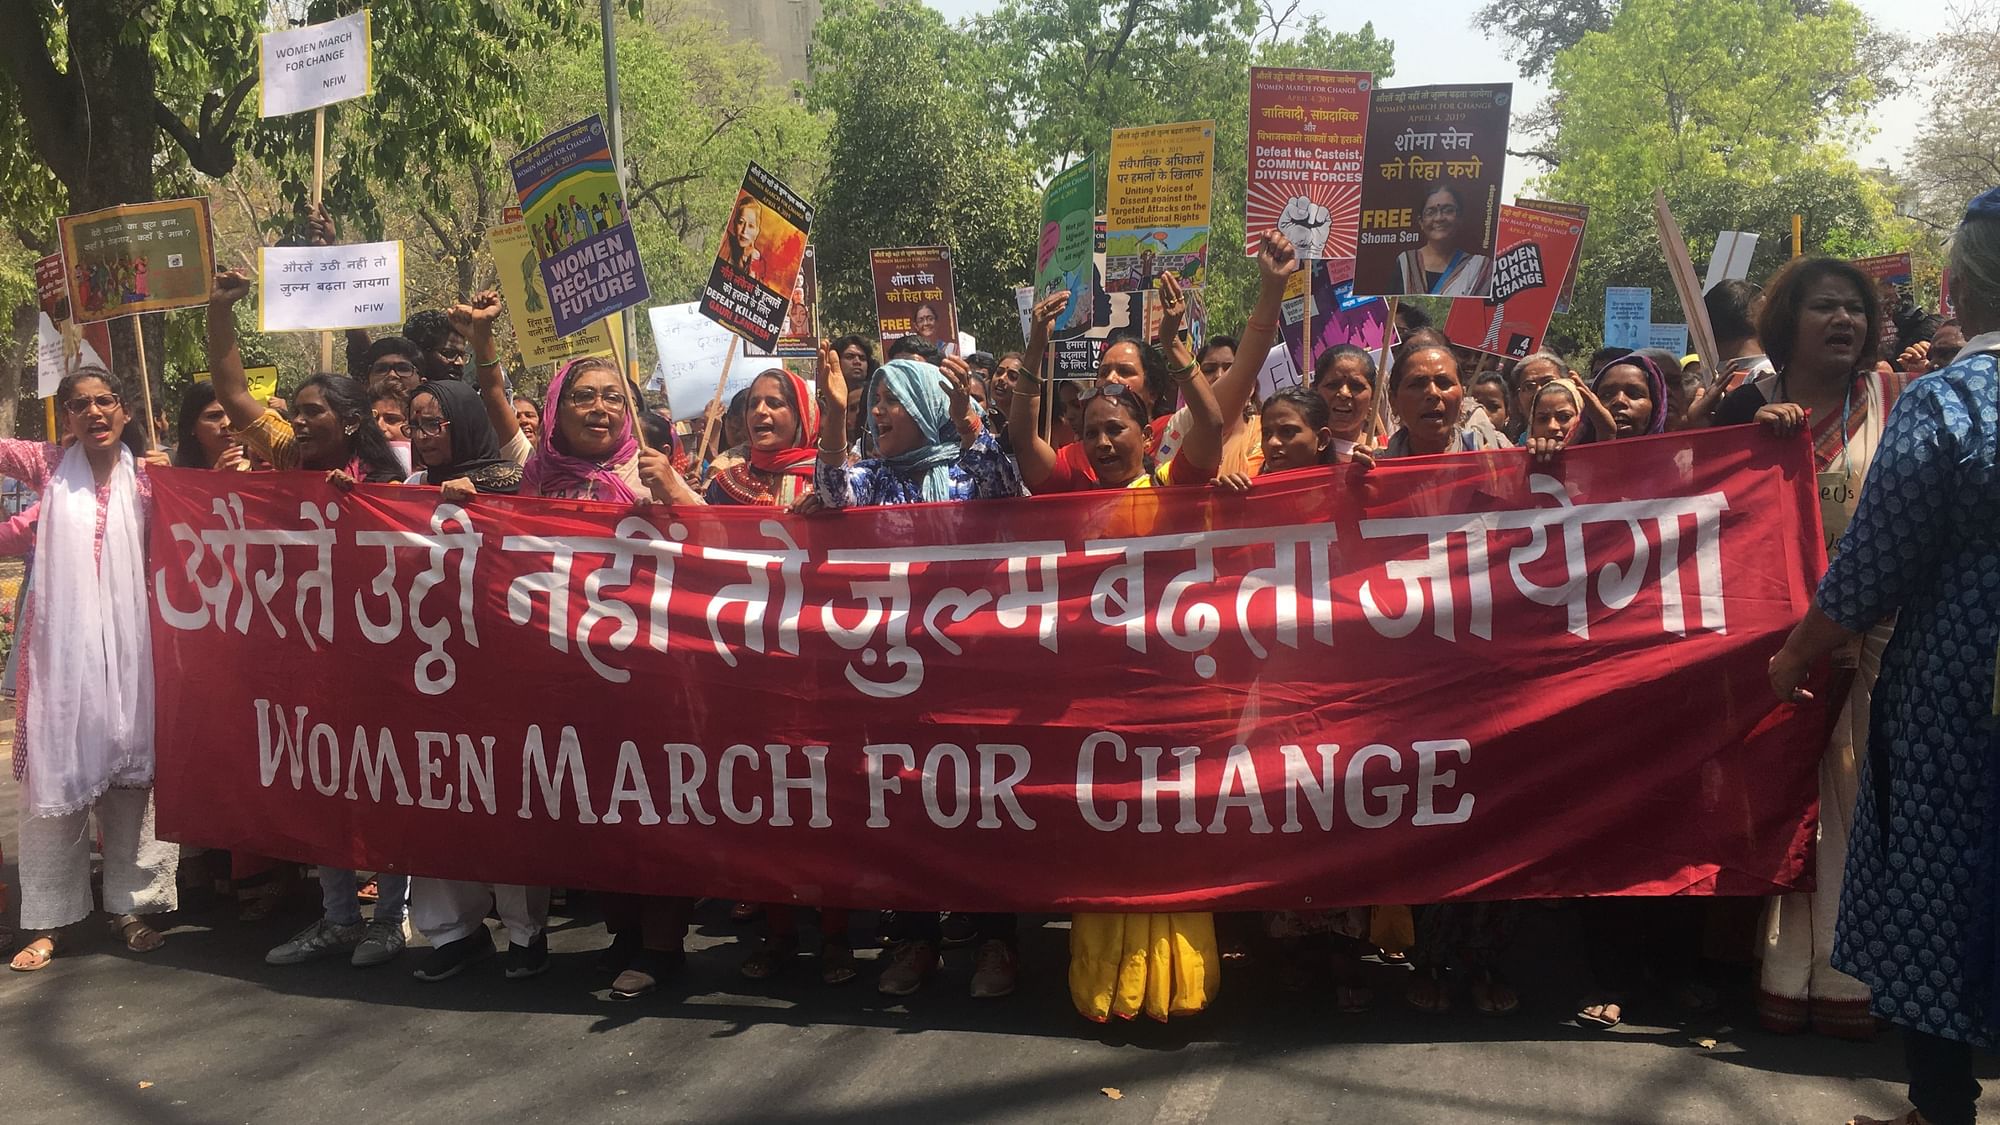 Women raising slogans in solidarity for the Women March for Change